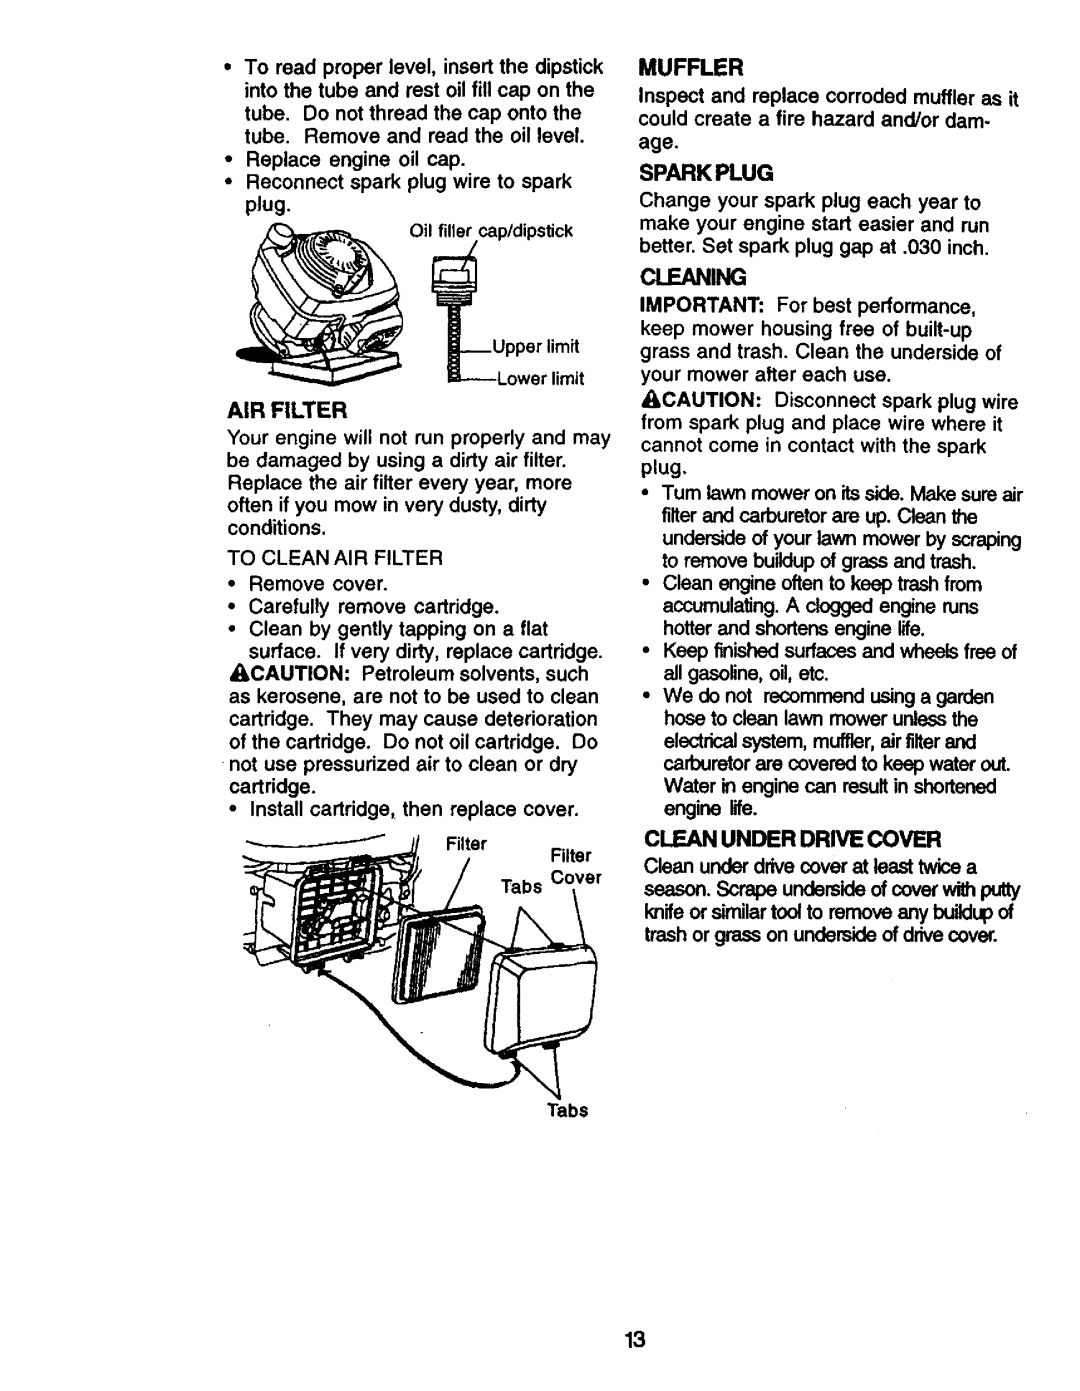 Craftsman 917.379480 owner manual Muffler, Cleaning, Air Filter, Spark Plug, Clean Under Drive Cover 